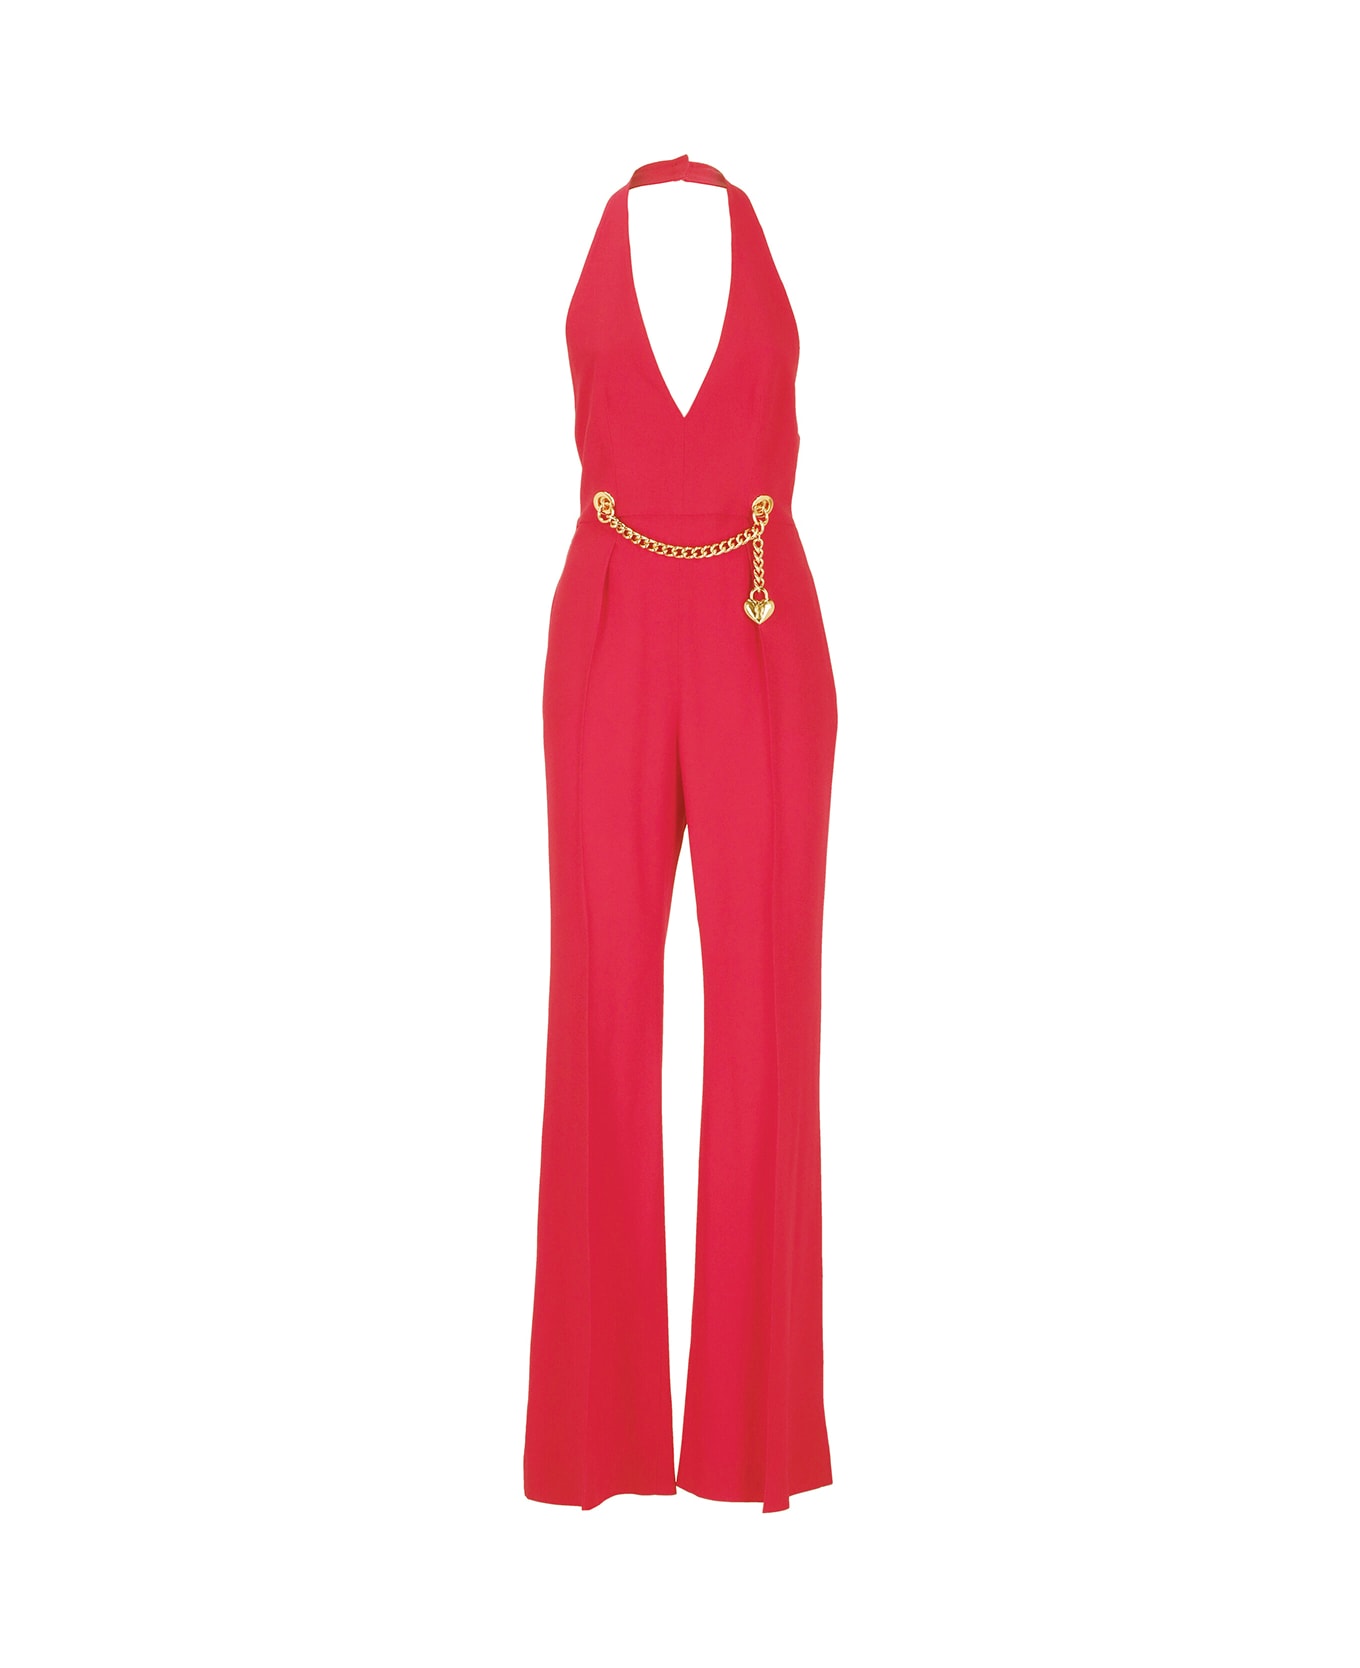 Moschino Chain And Heart Jumpsuit - Red ジャンプスーツ